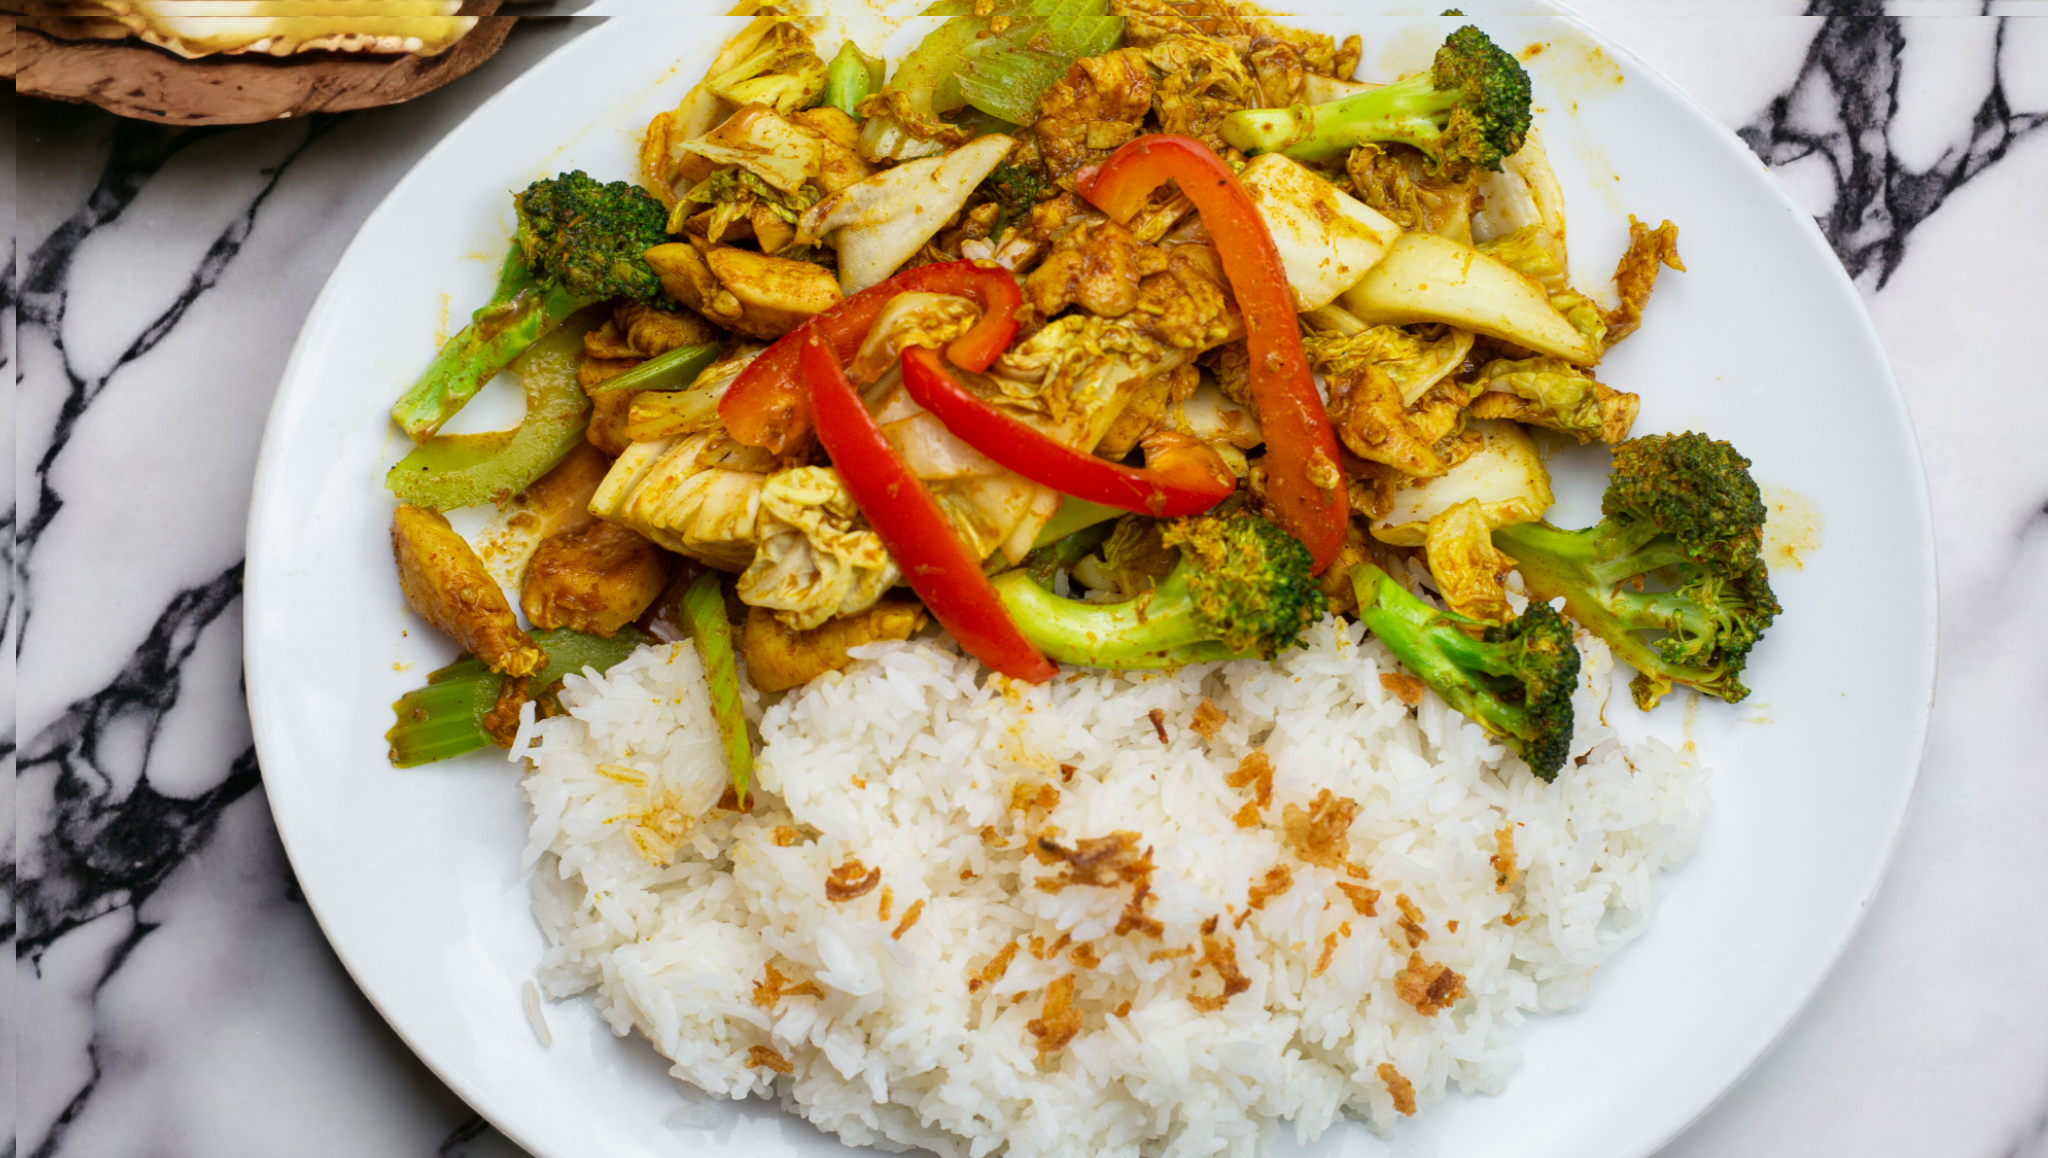 Stirred Fried Yellow Chicken Curry on Steamed Jasmine Rice